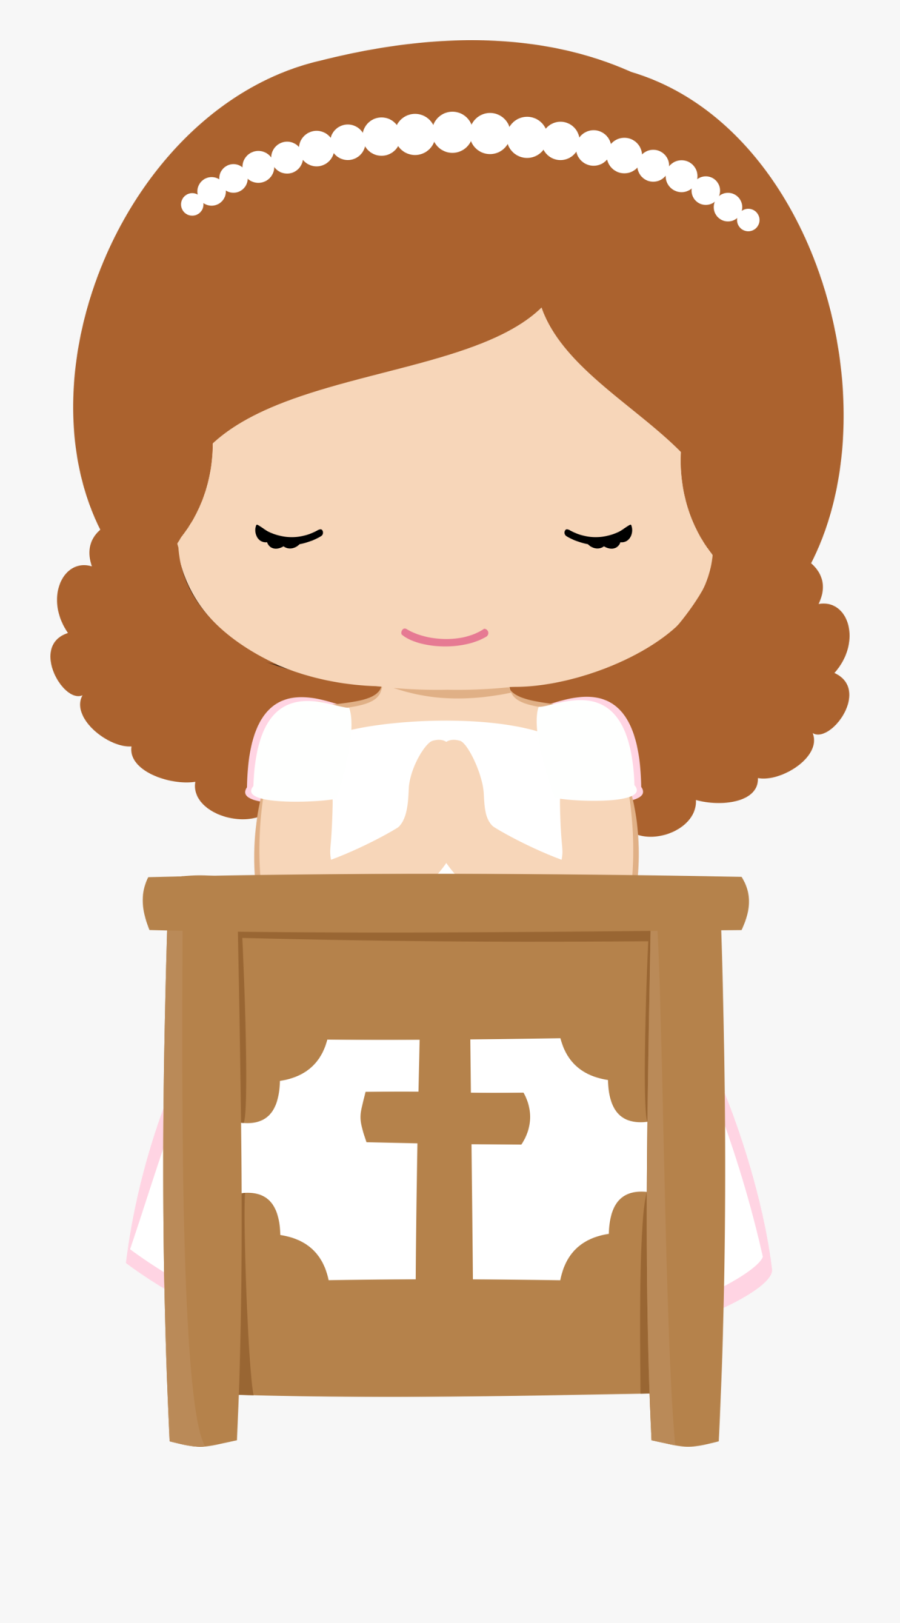 My First Communion Clip Art , Free Transparent Clipart - ClipartKey.